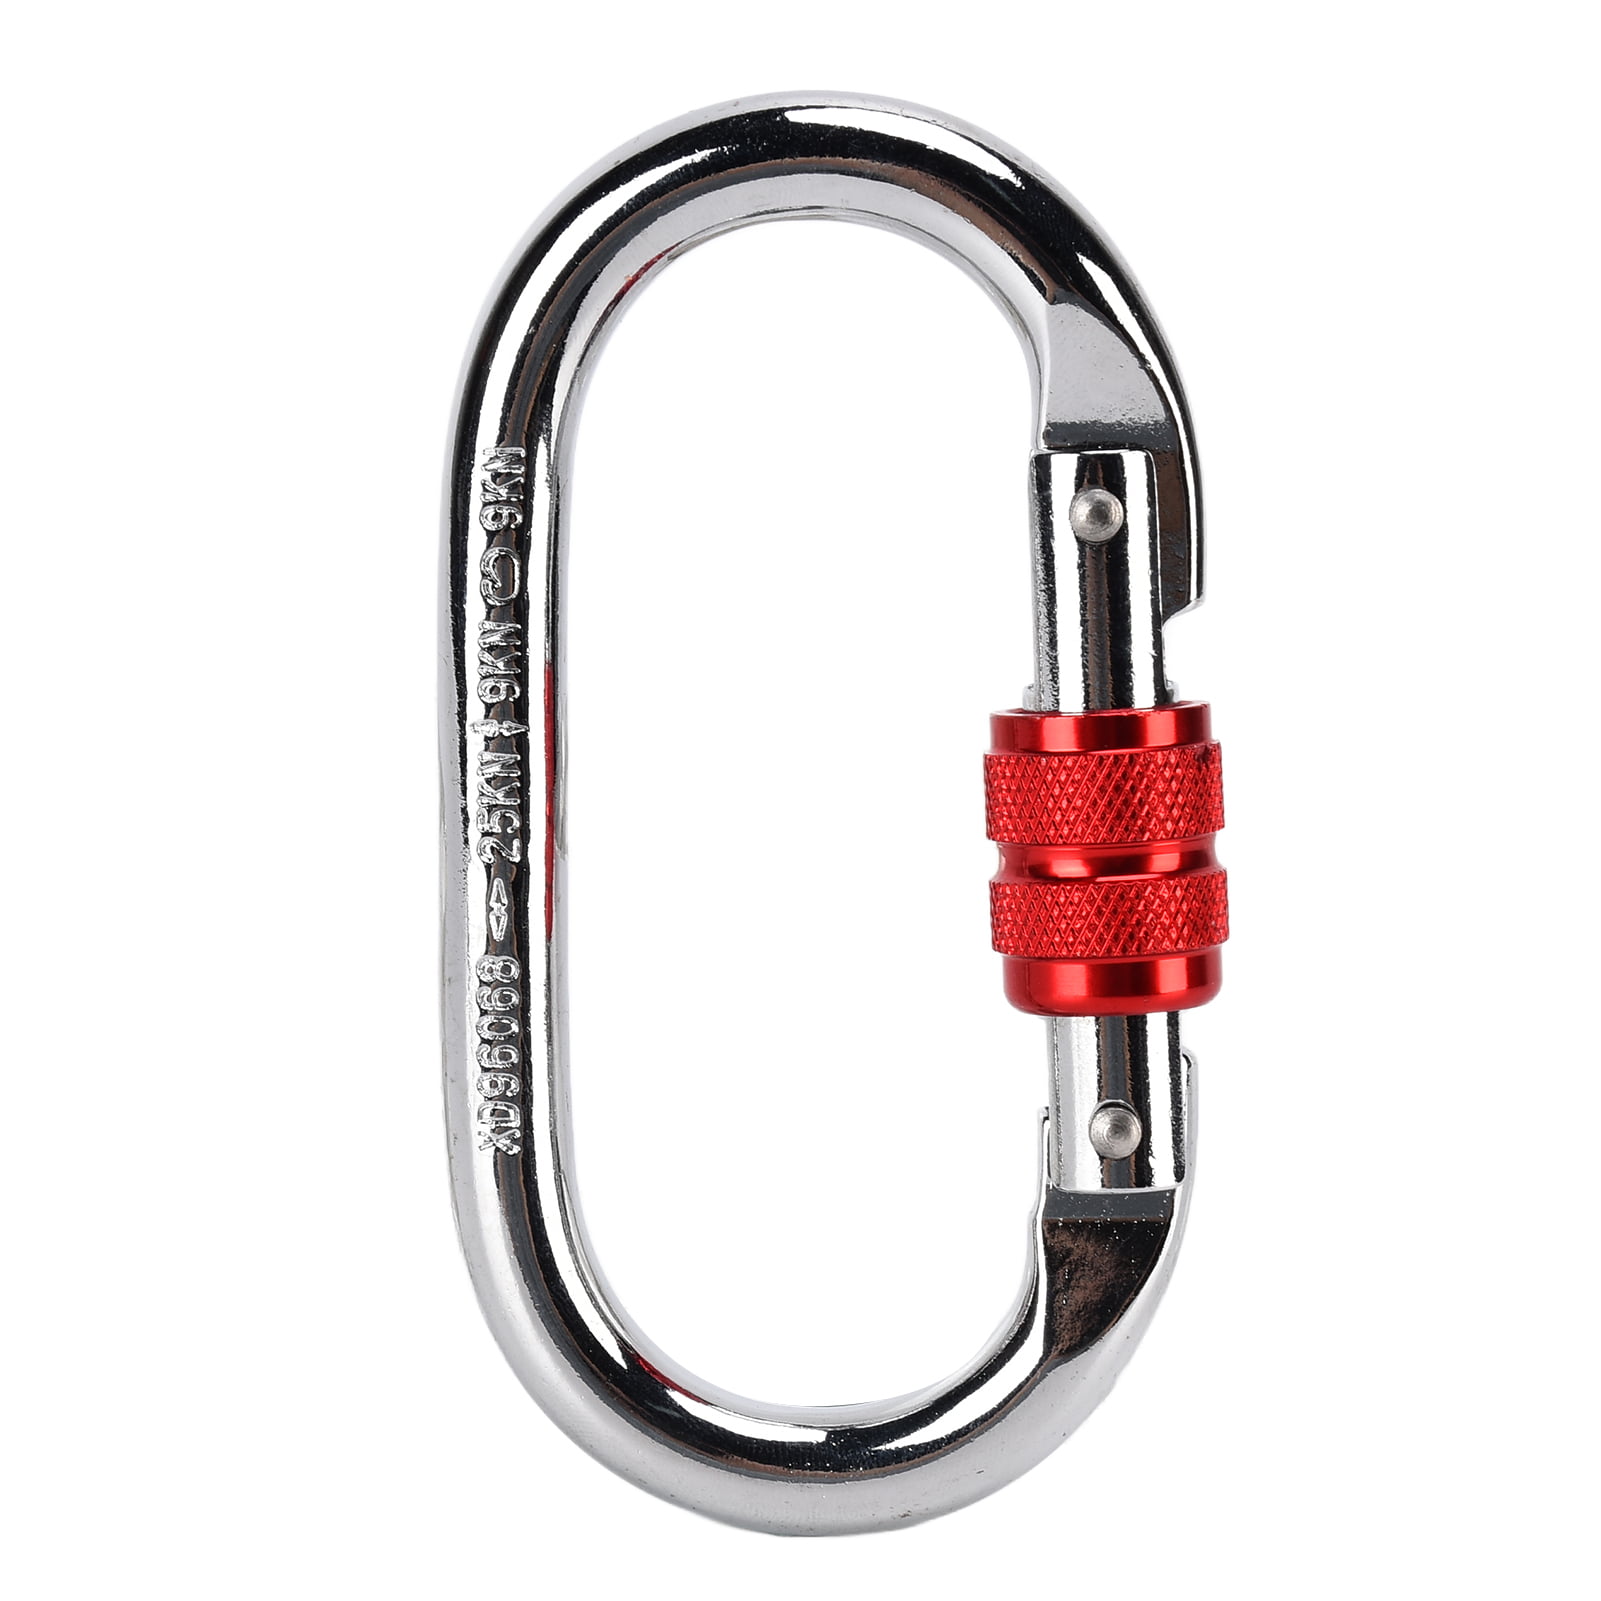 FAGINEY Locking Clip Hook,Climbing Carabiner Vertical 25KN O Spring Loaded For Backpackers Hikers Climber,Locking Snap Hook